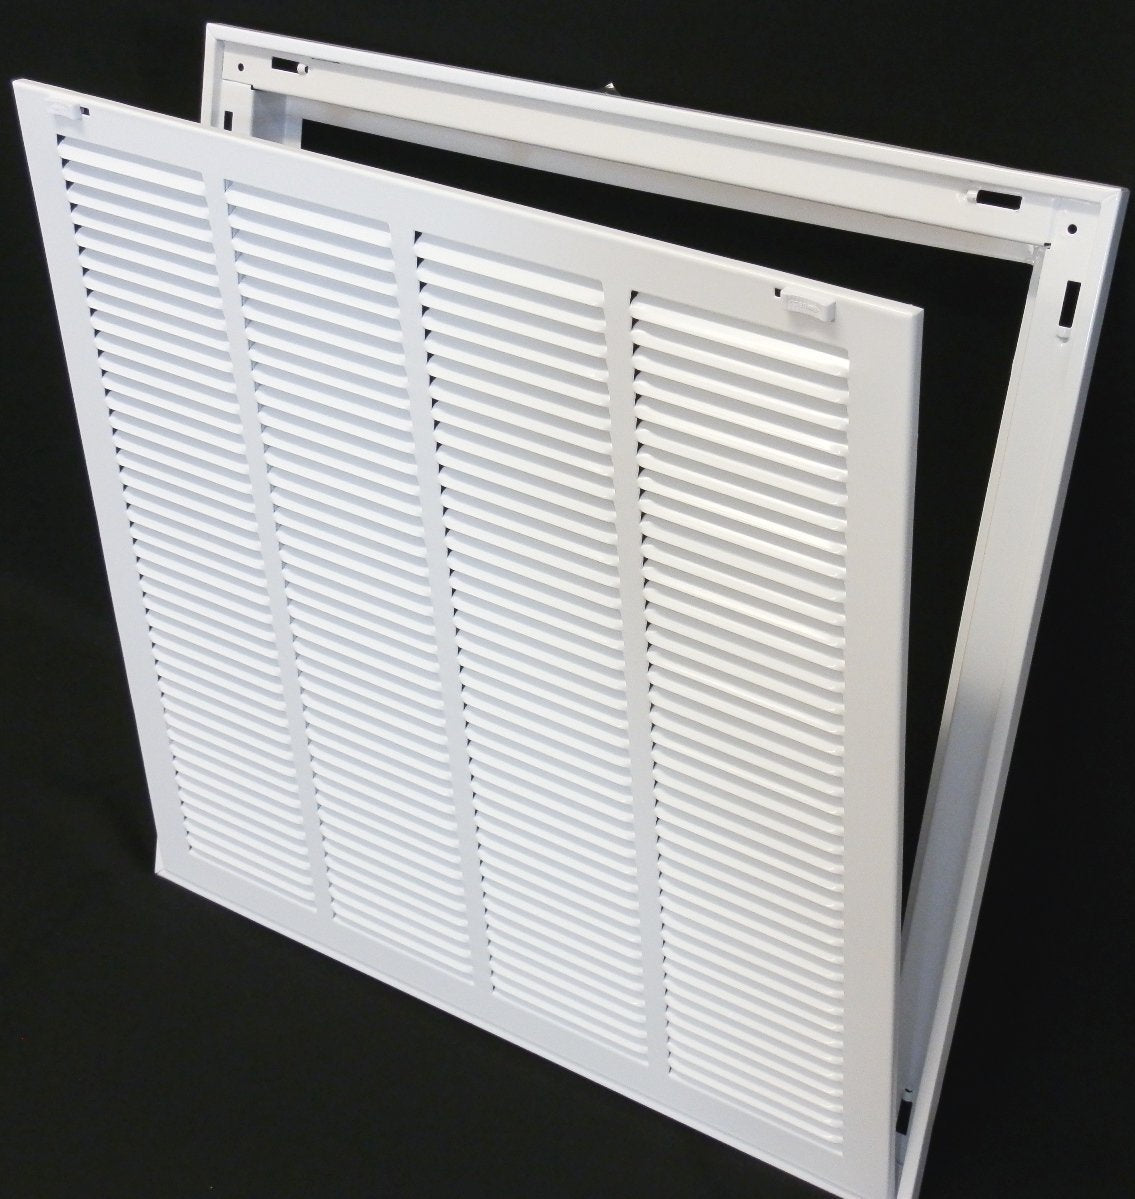 16&quot; X 26&quot; Steel Return Air Filter Grille for 1&quot; Filter - Removable Frame - [Outer Dimensions: 18 5/8&quot; X 28 5/8&quot;]